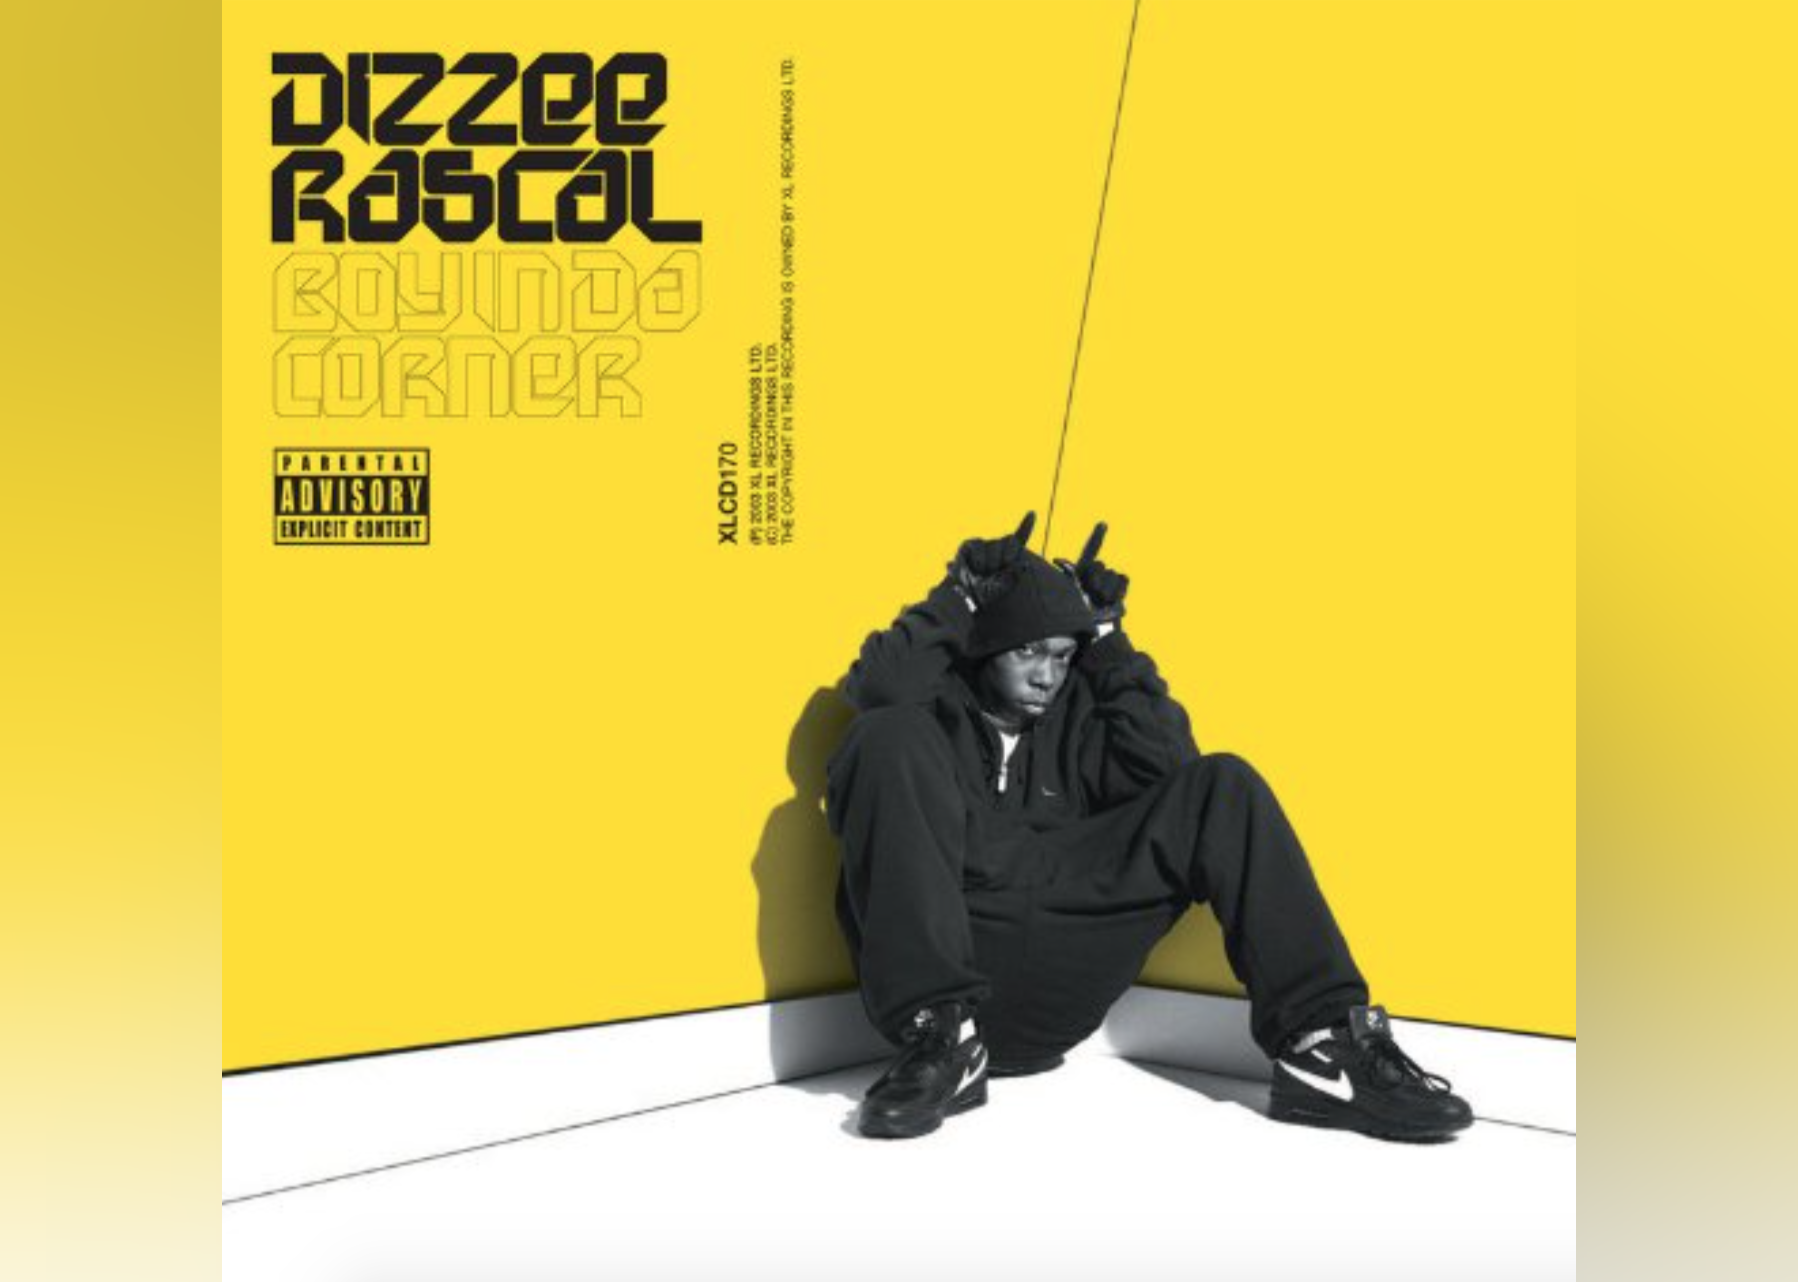 Dizzee Rascal sitting in the corner of a yellow room wearing all black and making ears with his hands over his head.